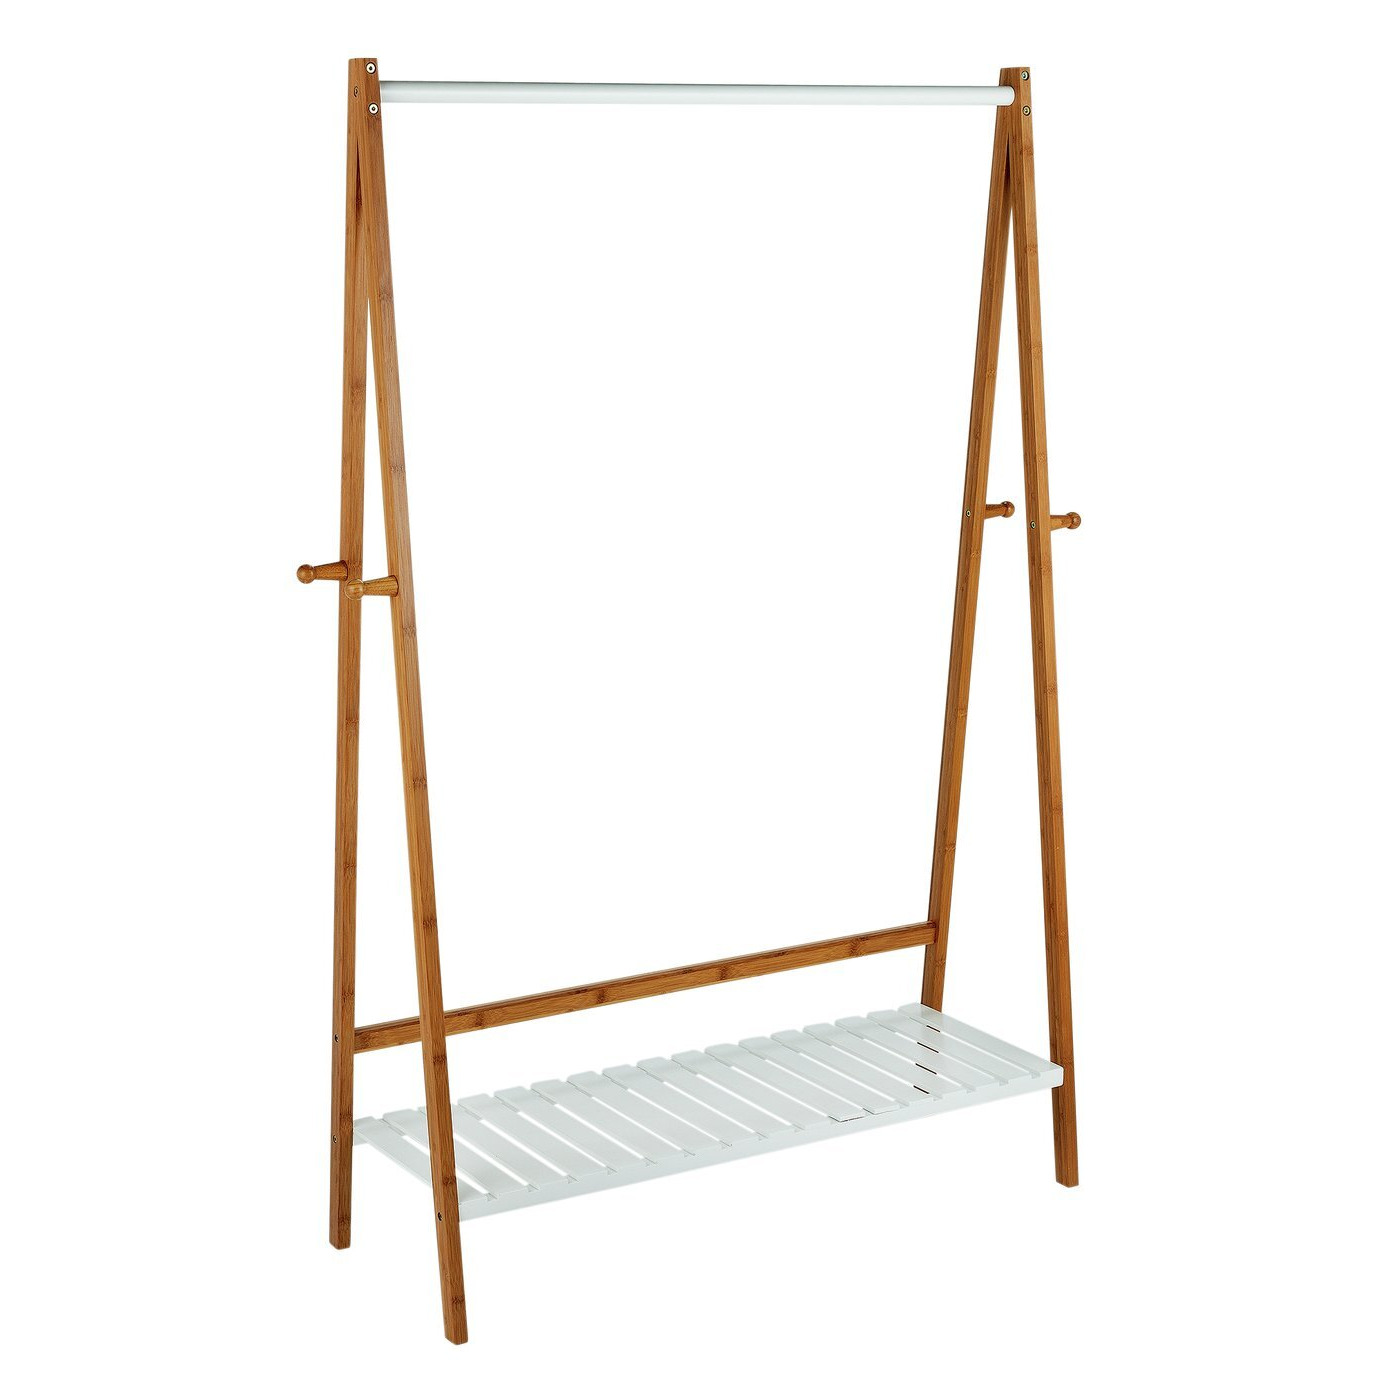 Argos Home Belvoir Clothes Rail with Shelf - Bamboo & White - image 1